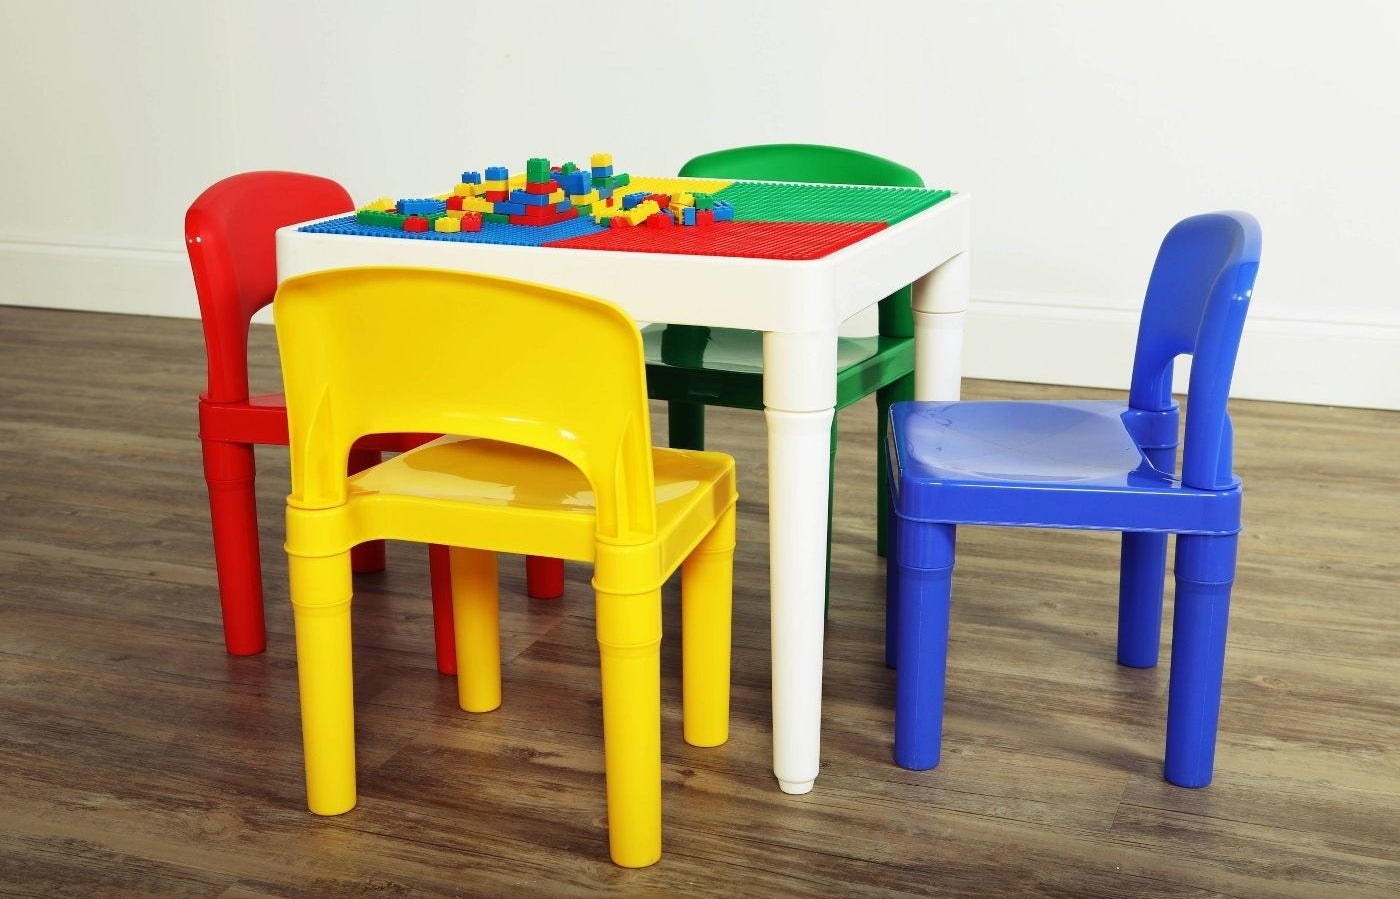 Lego table and chairs